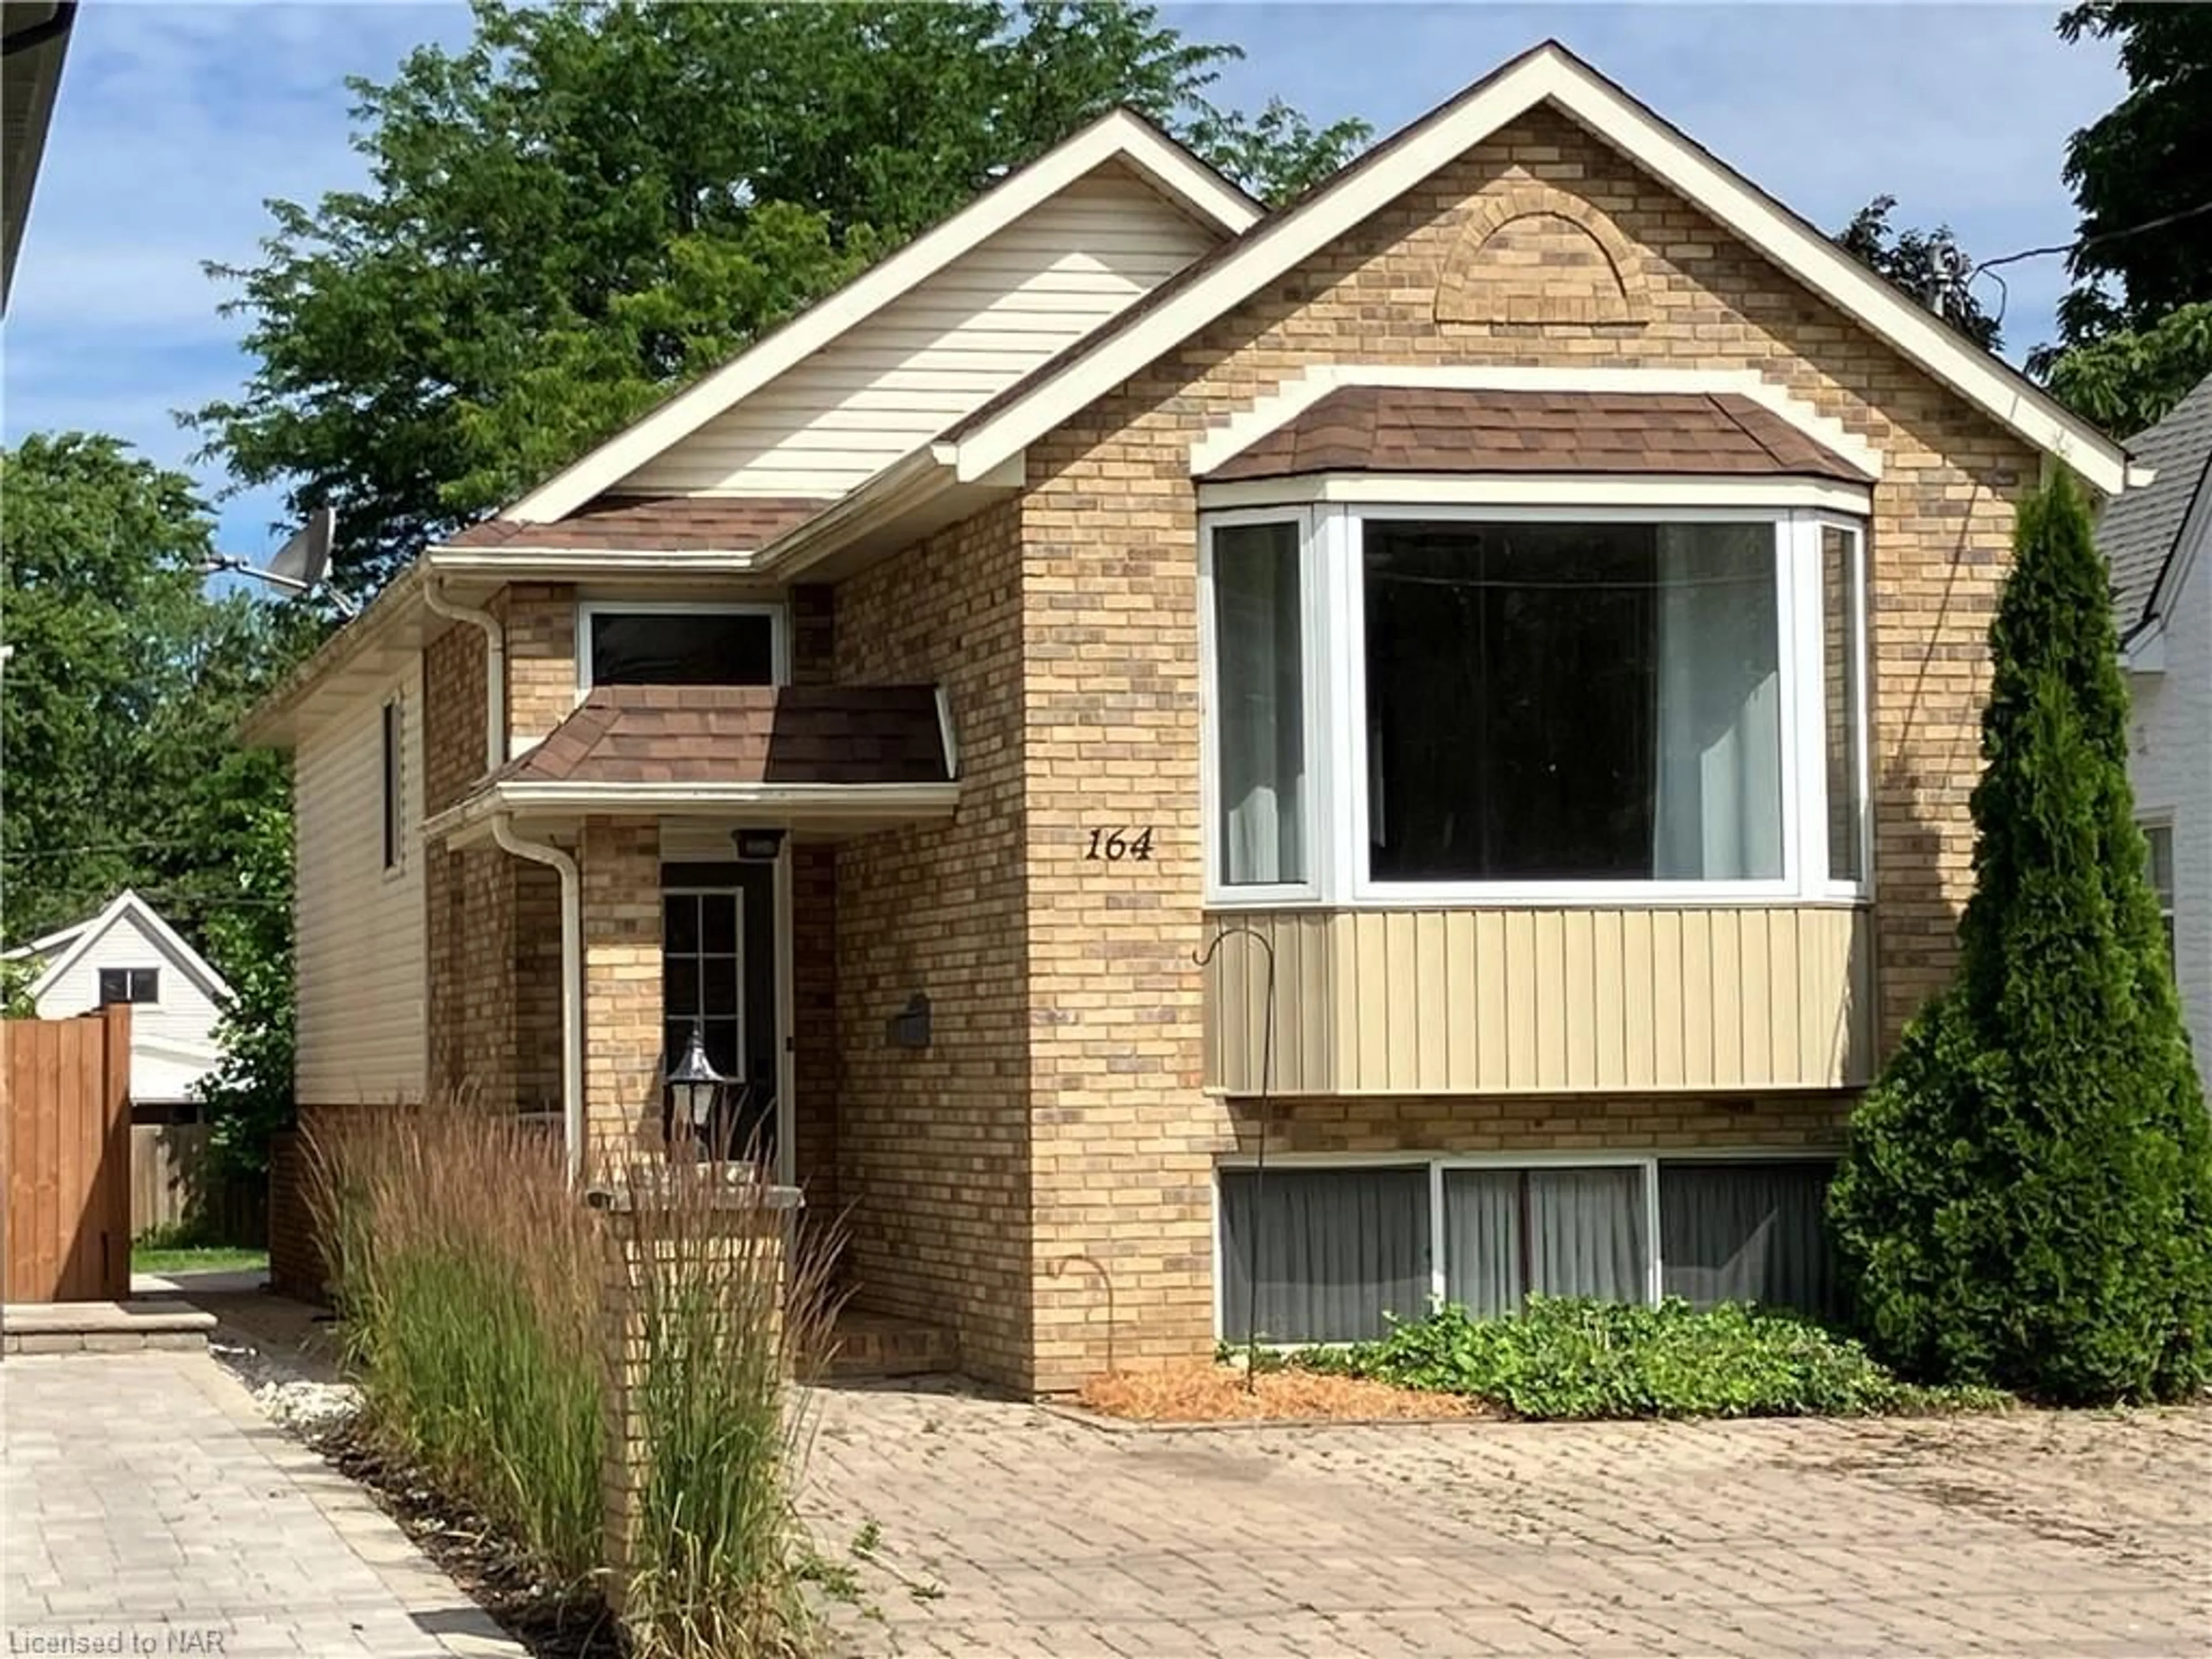 Home with brick exterior material for 164 Dalhousie Ave, St. Catharines Ontario L2N 4X7